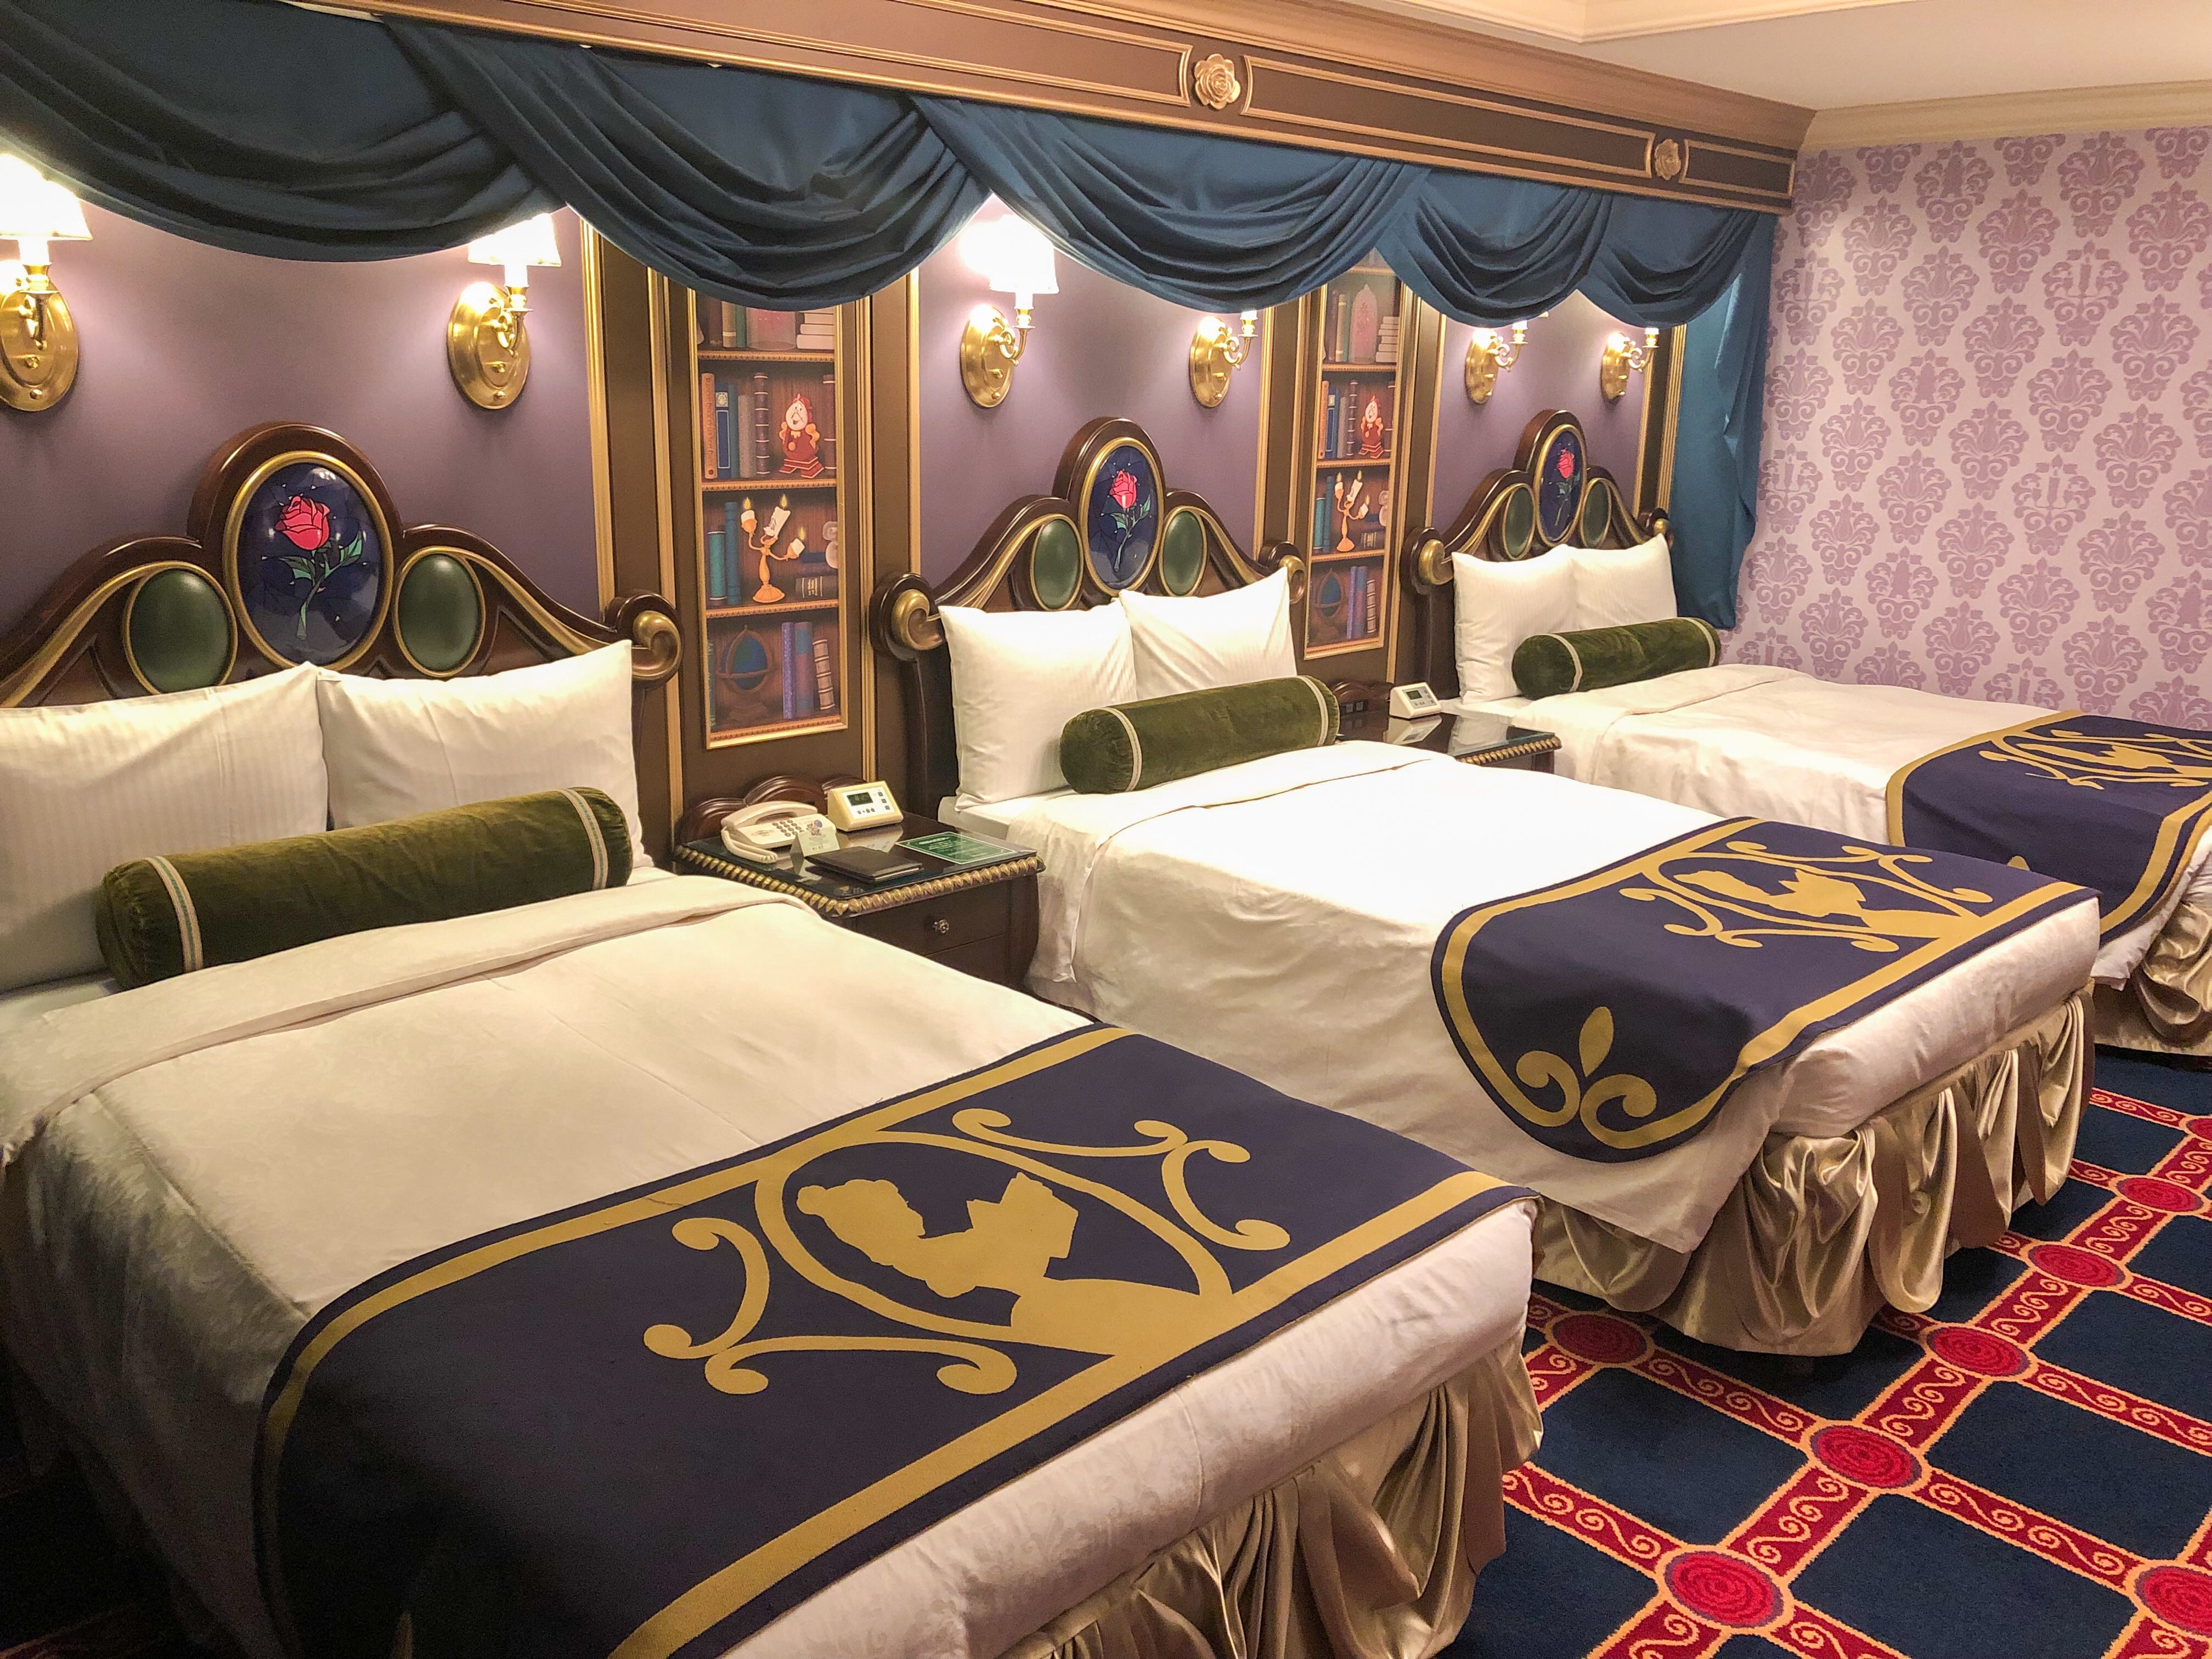 Beauty And The Beast Character Room Tokyo Disneyland Hotel Pics Group1 March20 3 